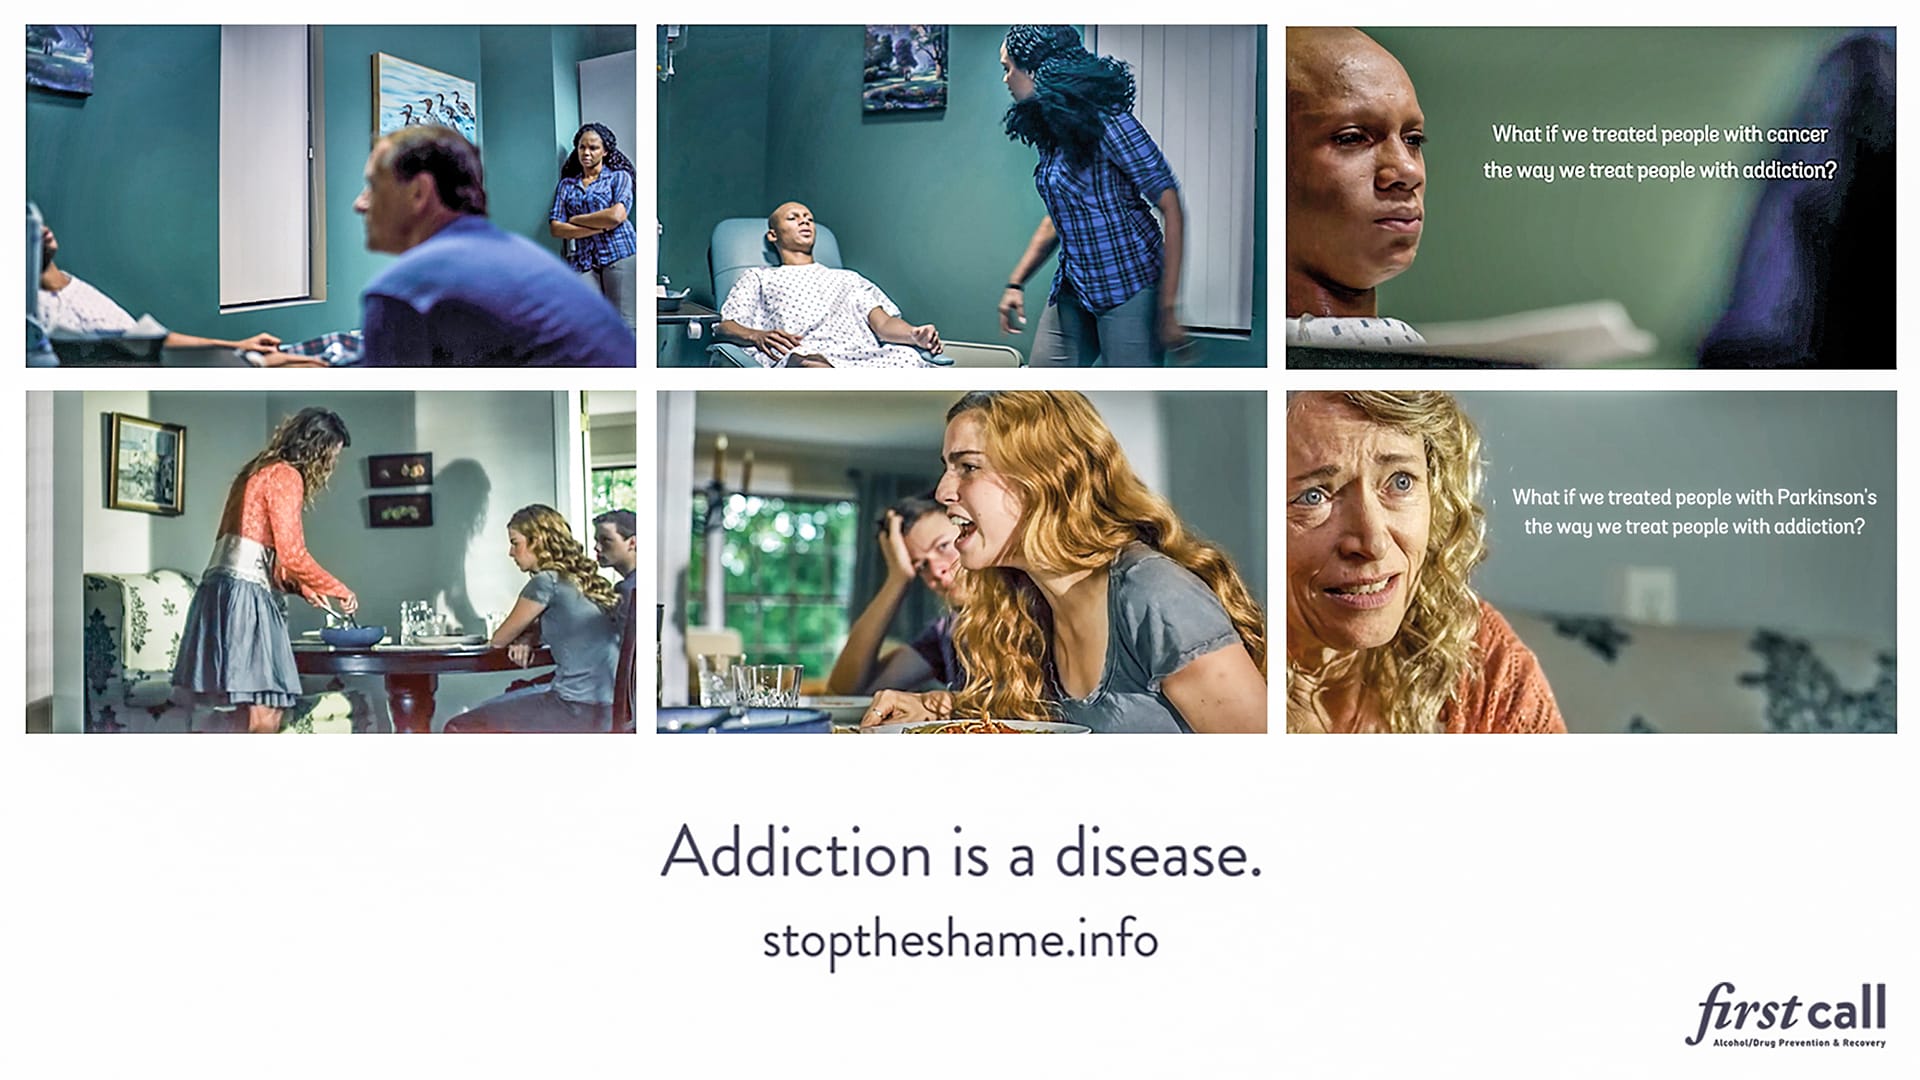 Addiction is a disease poster